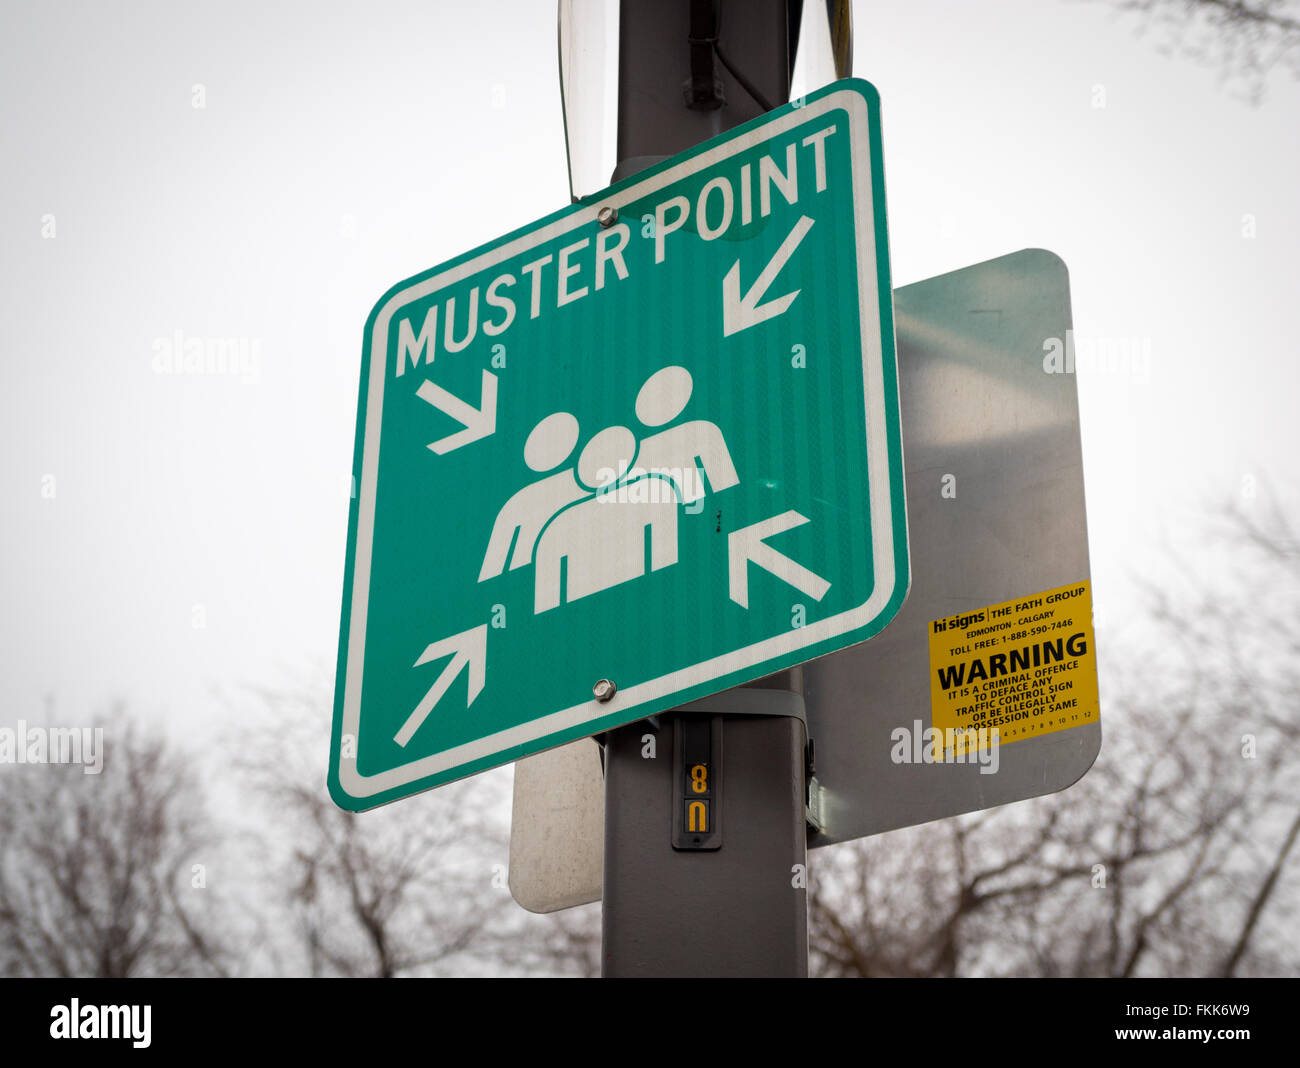 A sign depicting a muster point (meeting point).  Edmonton, Alberta, Canada. Stock Photo